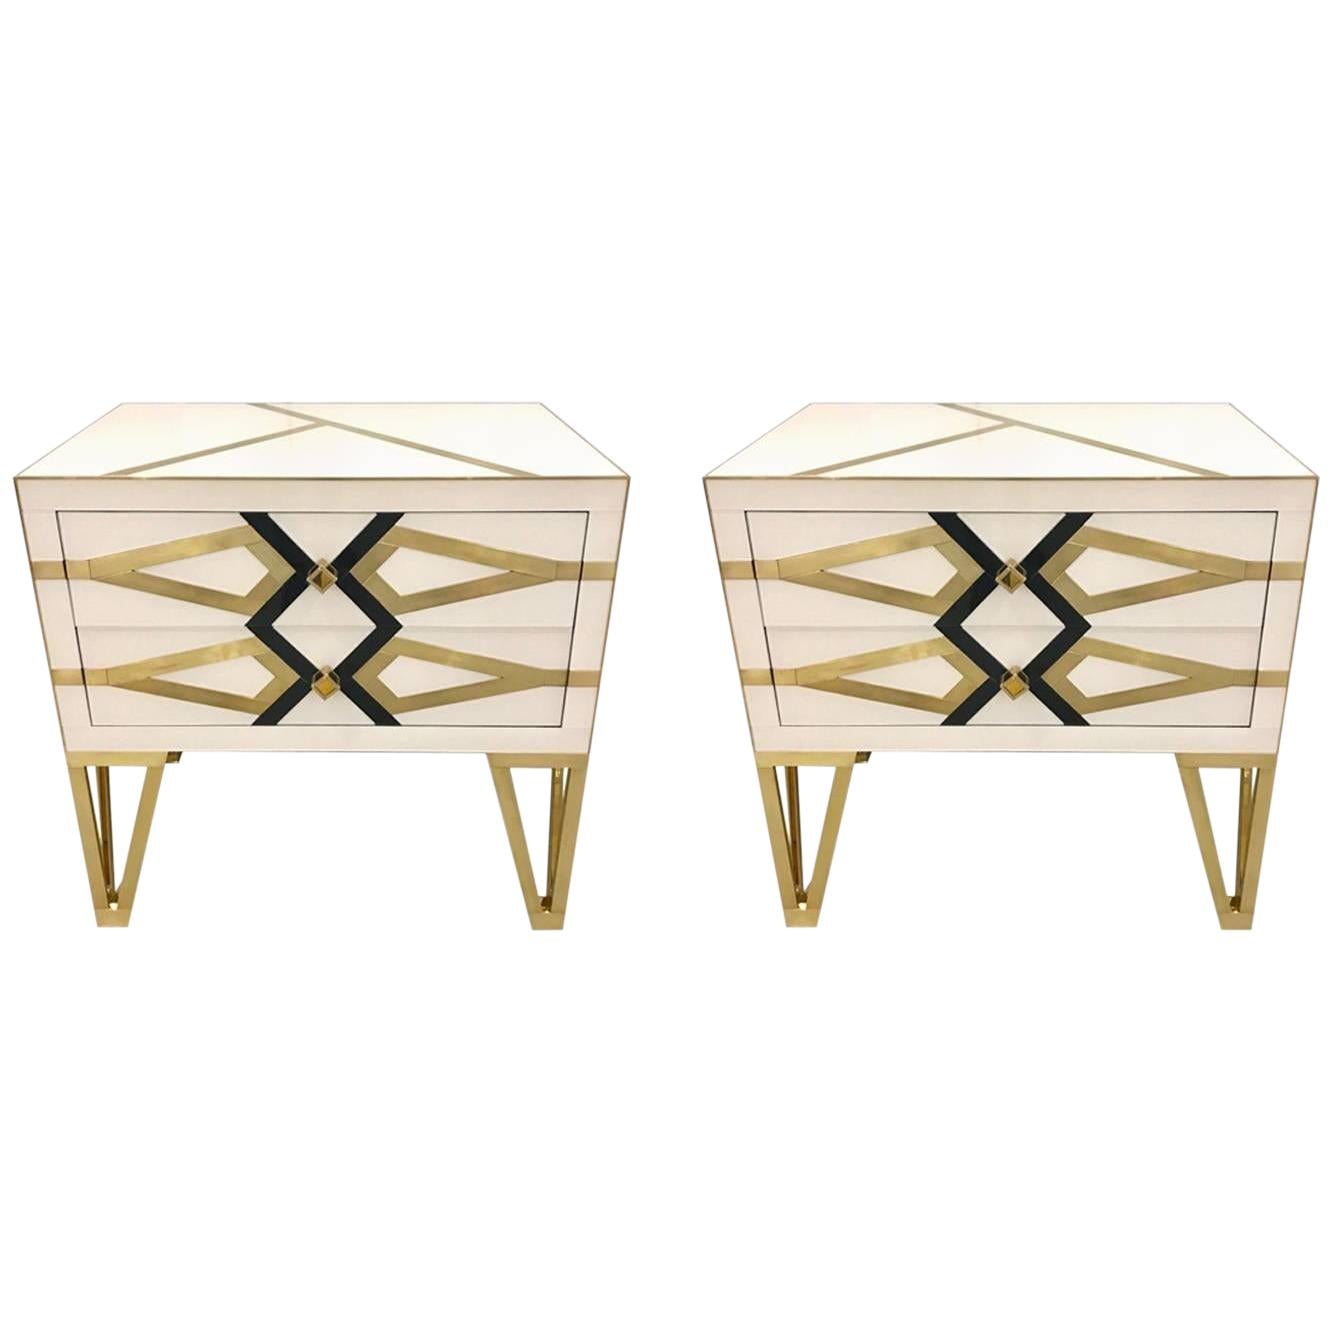 Bespoke Cosulich Creation Gold Brass Black & White Side Tables/Nightstands, Pair